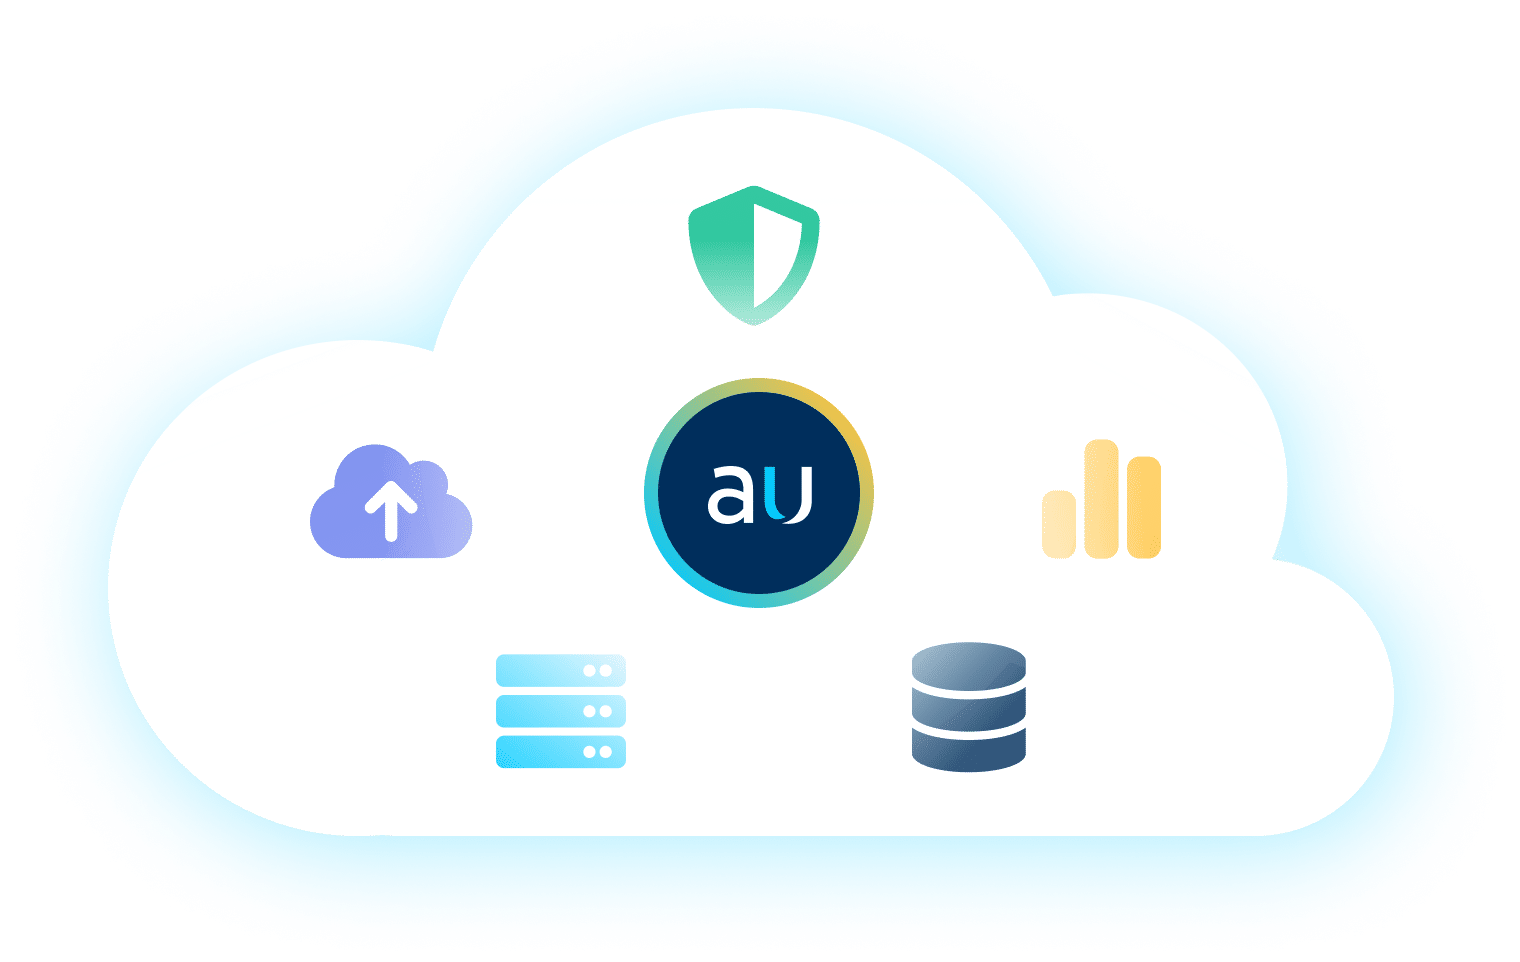 Aunalytics cloud-based platform includes cloud hosting, storage, compute, security, data management, backup & DR, and analytics services.